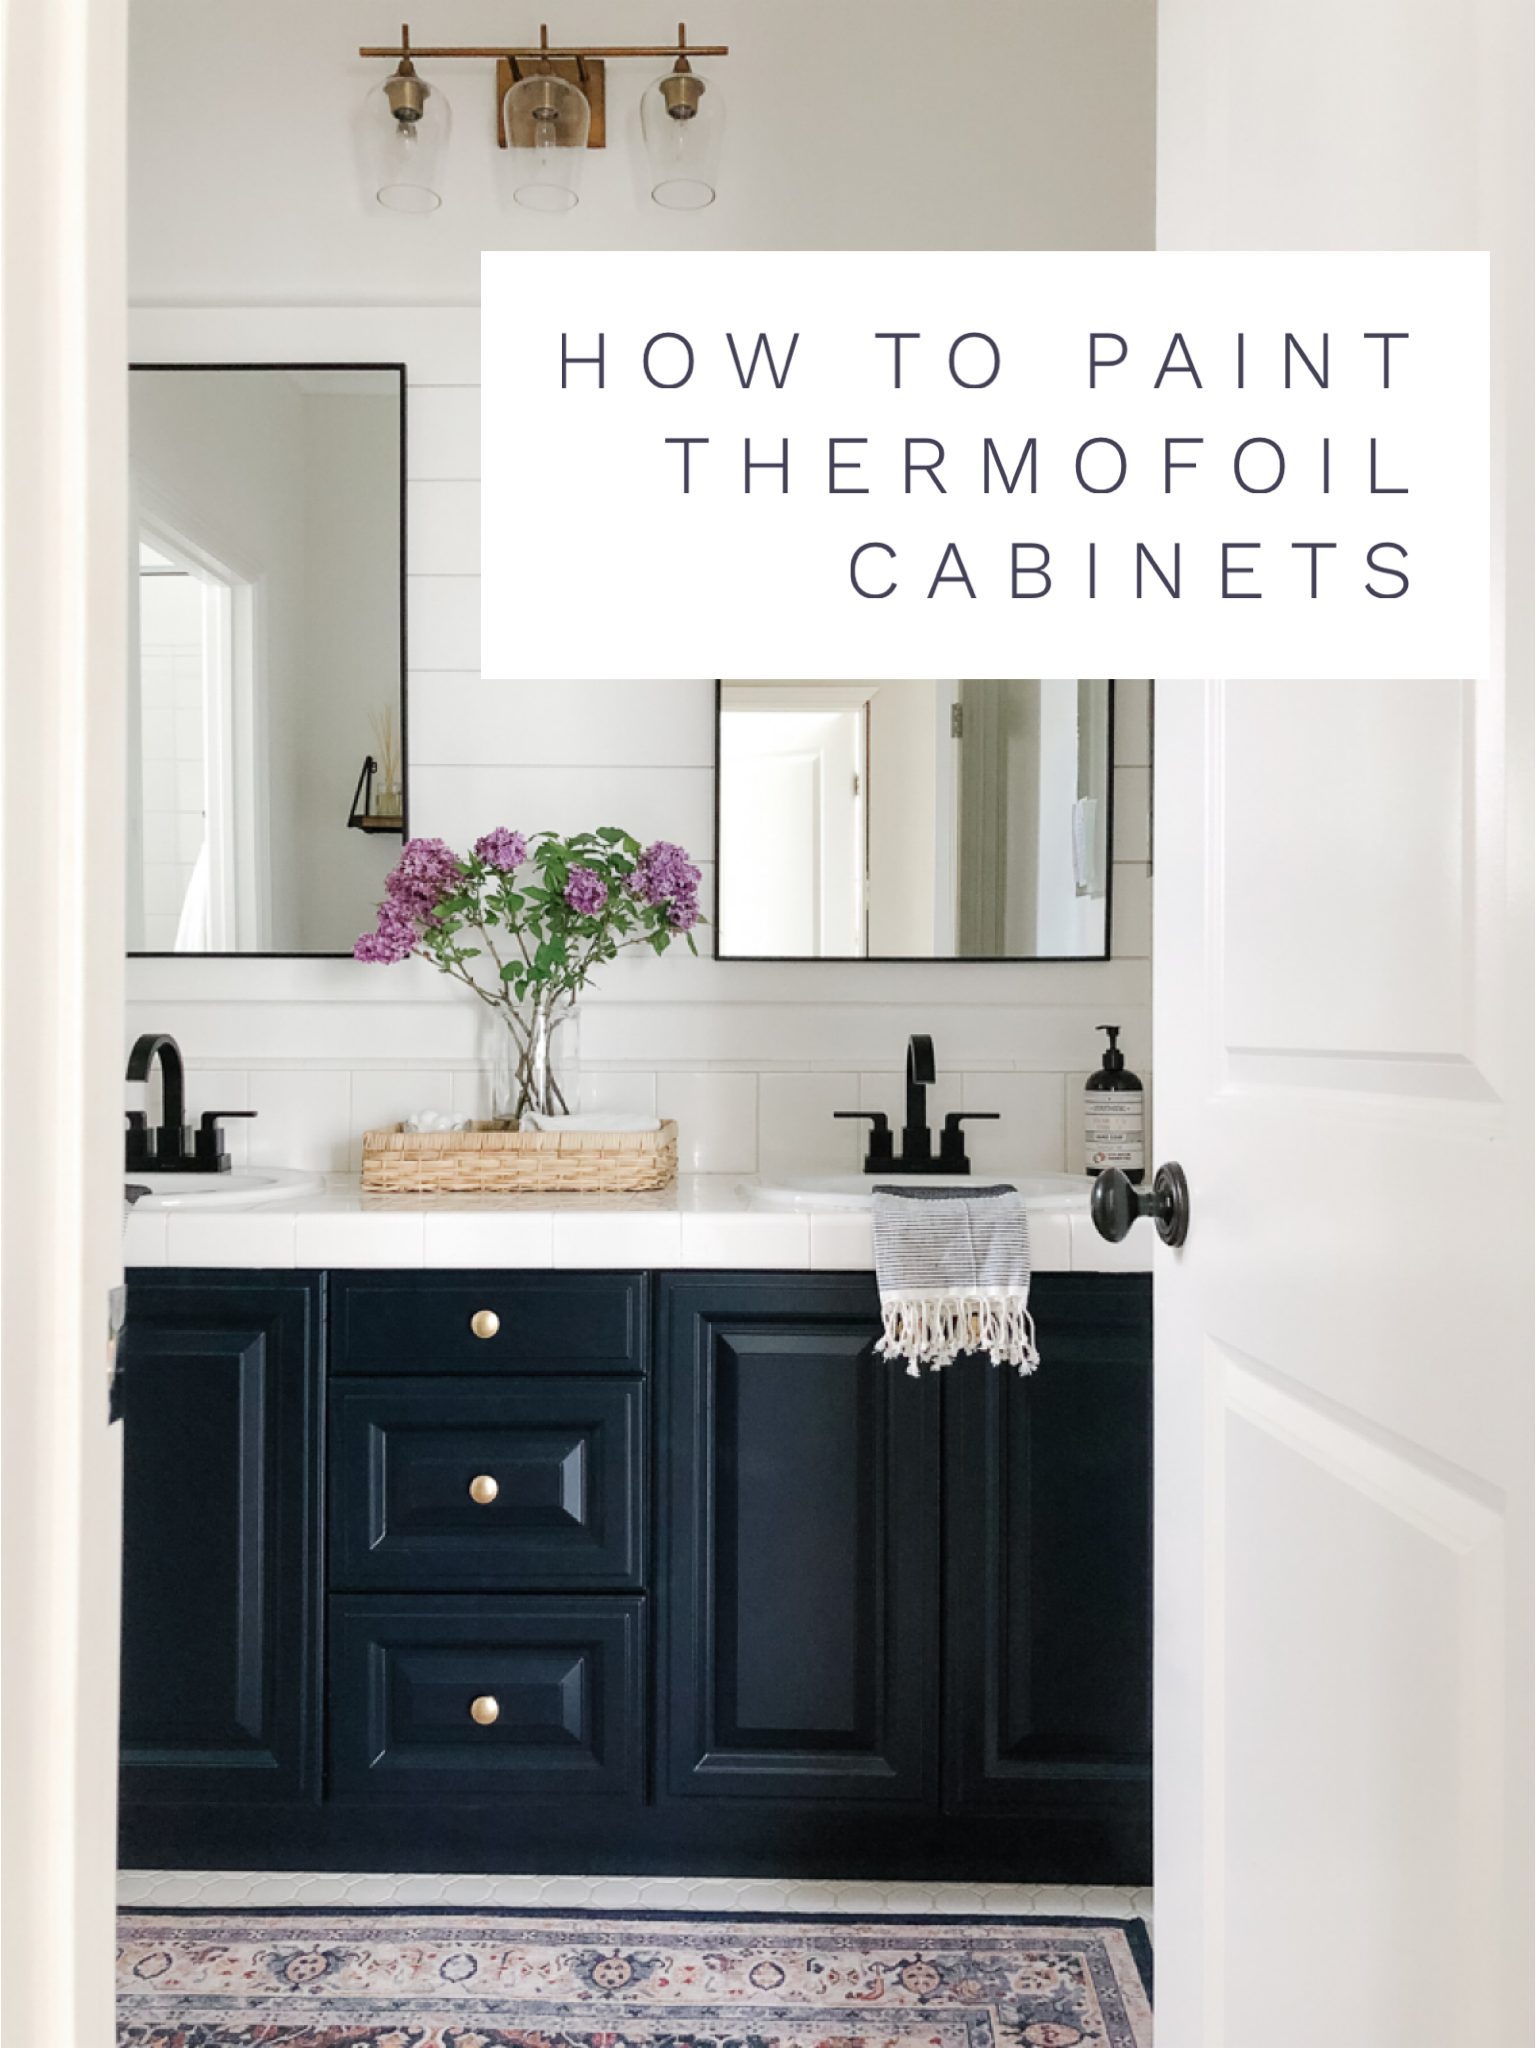 How to Paint Thermofoil Cabinets - A Thoughtful Place